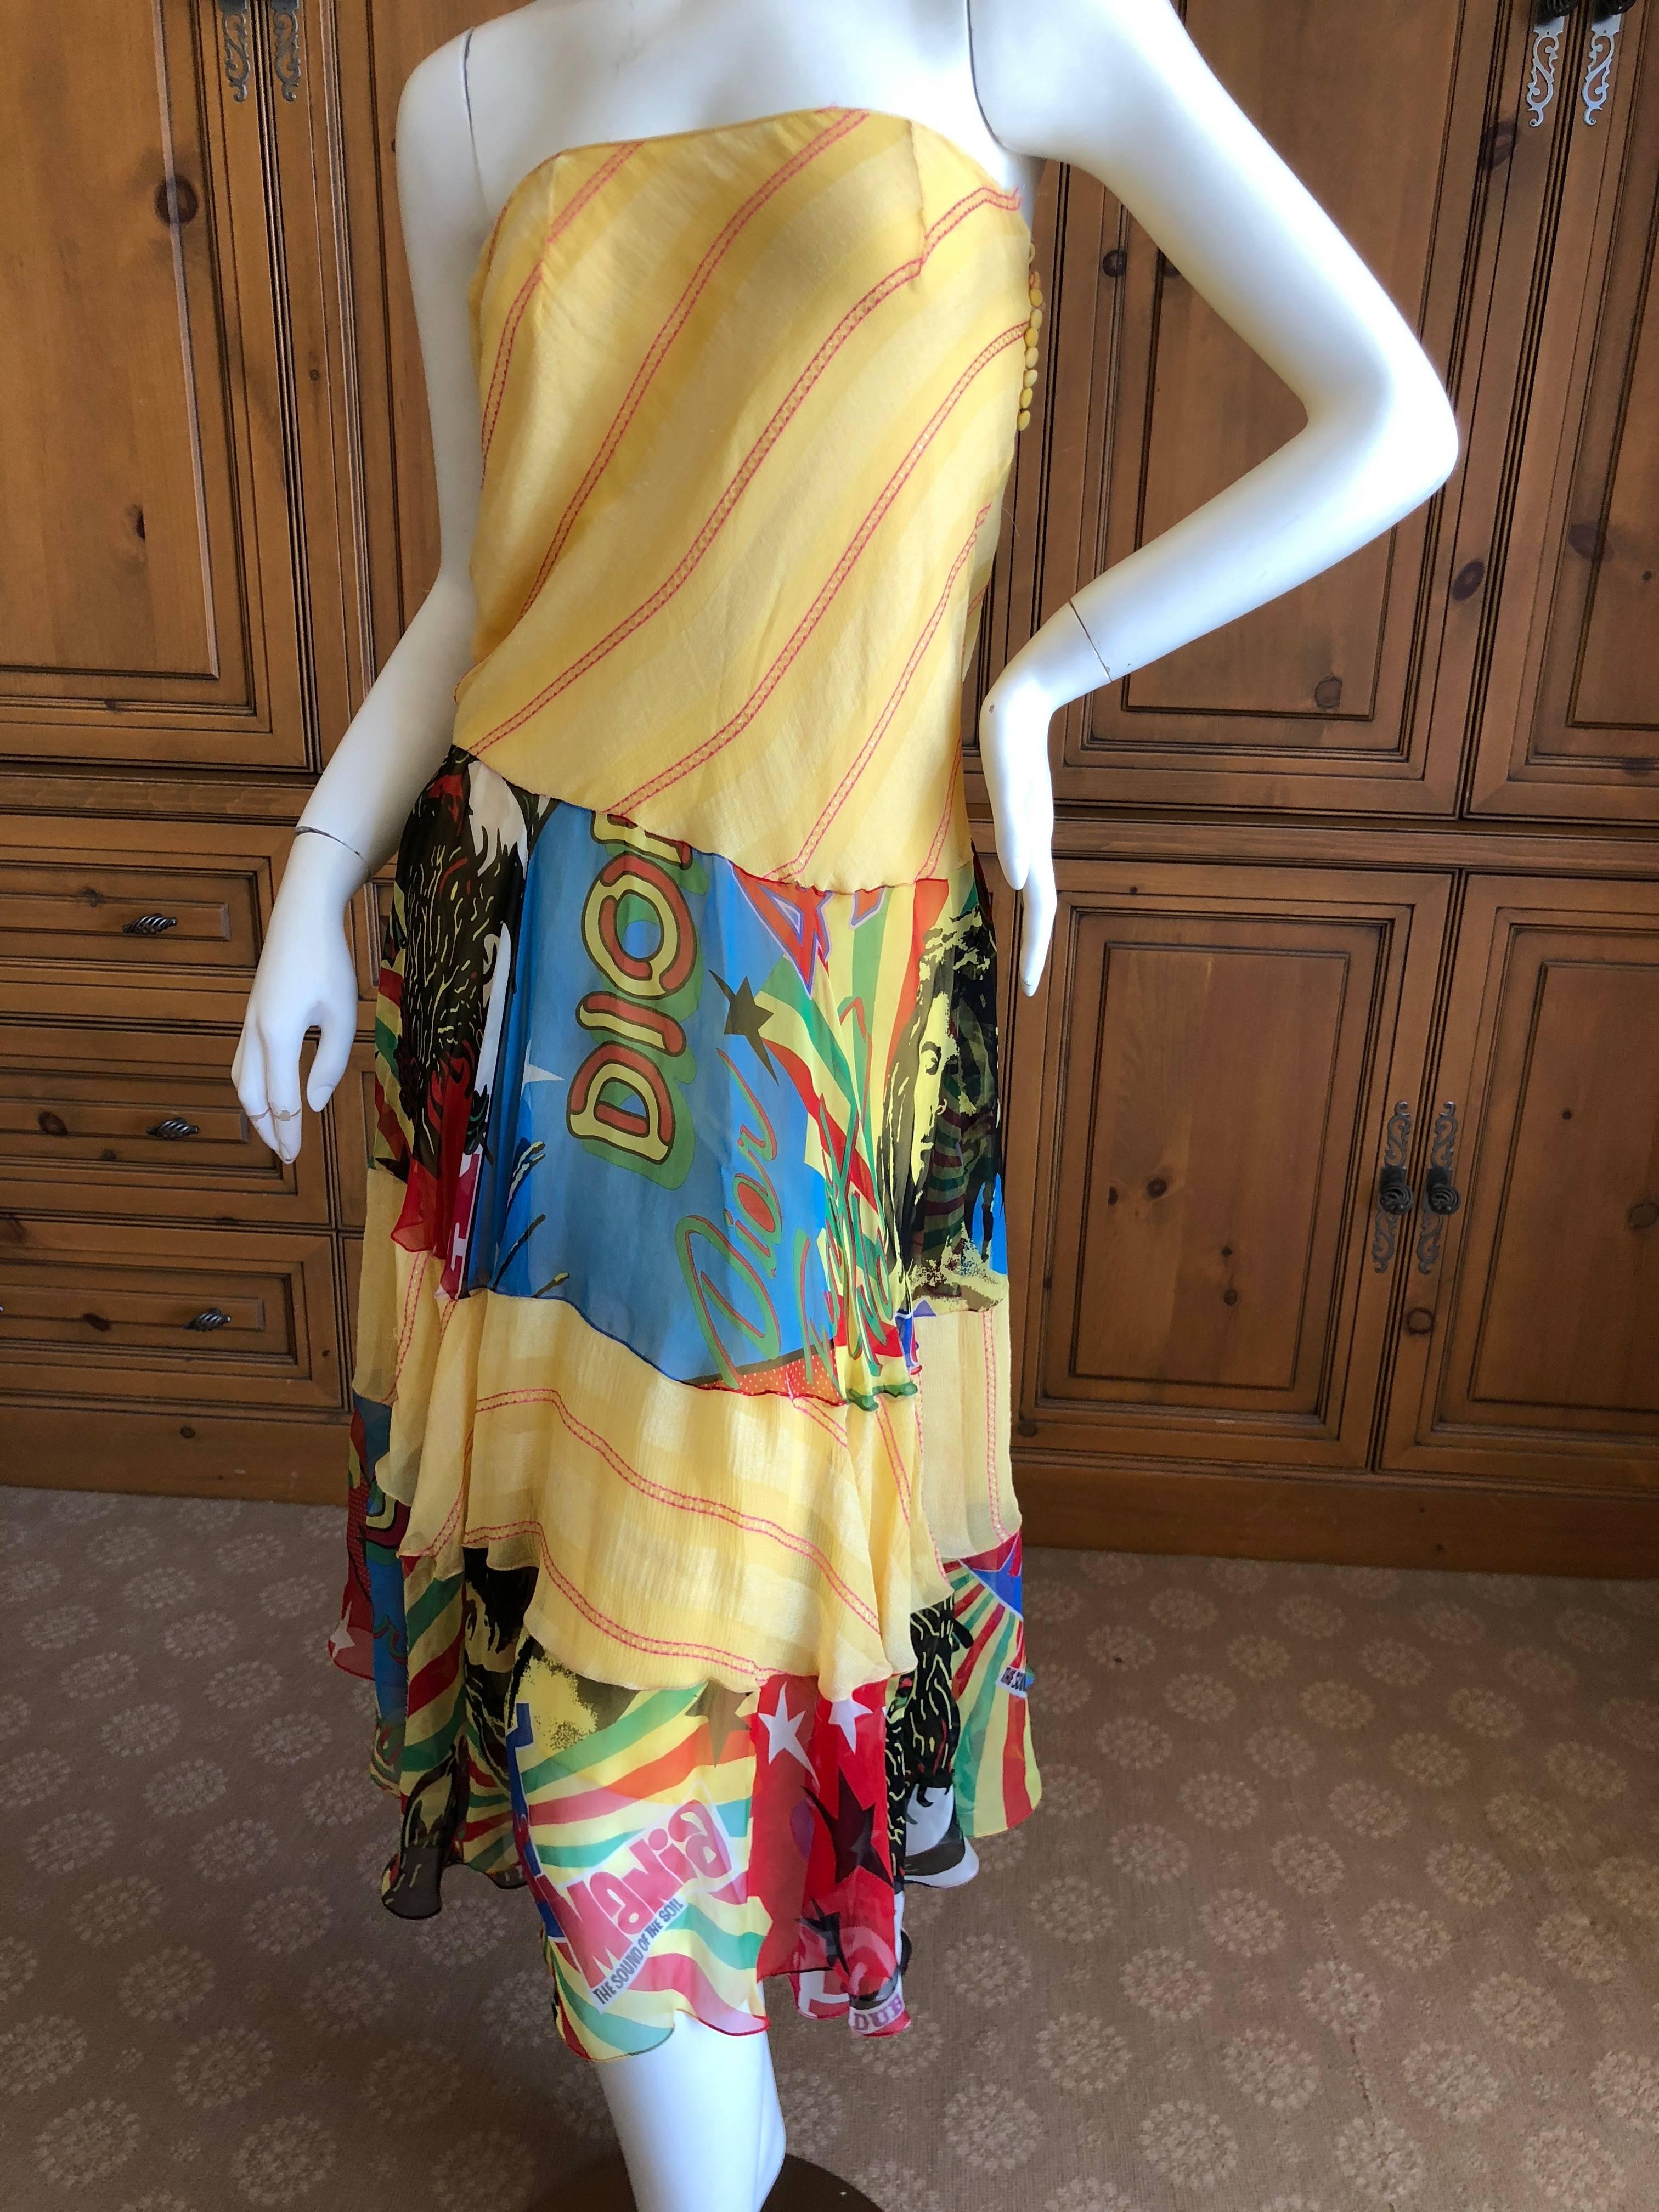 Christian Dior by Galliano 2004 Rasta Collection Silk Chiffon Dress In Excellent Condition For Sale In Cloverdale, CA